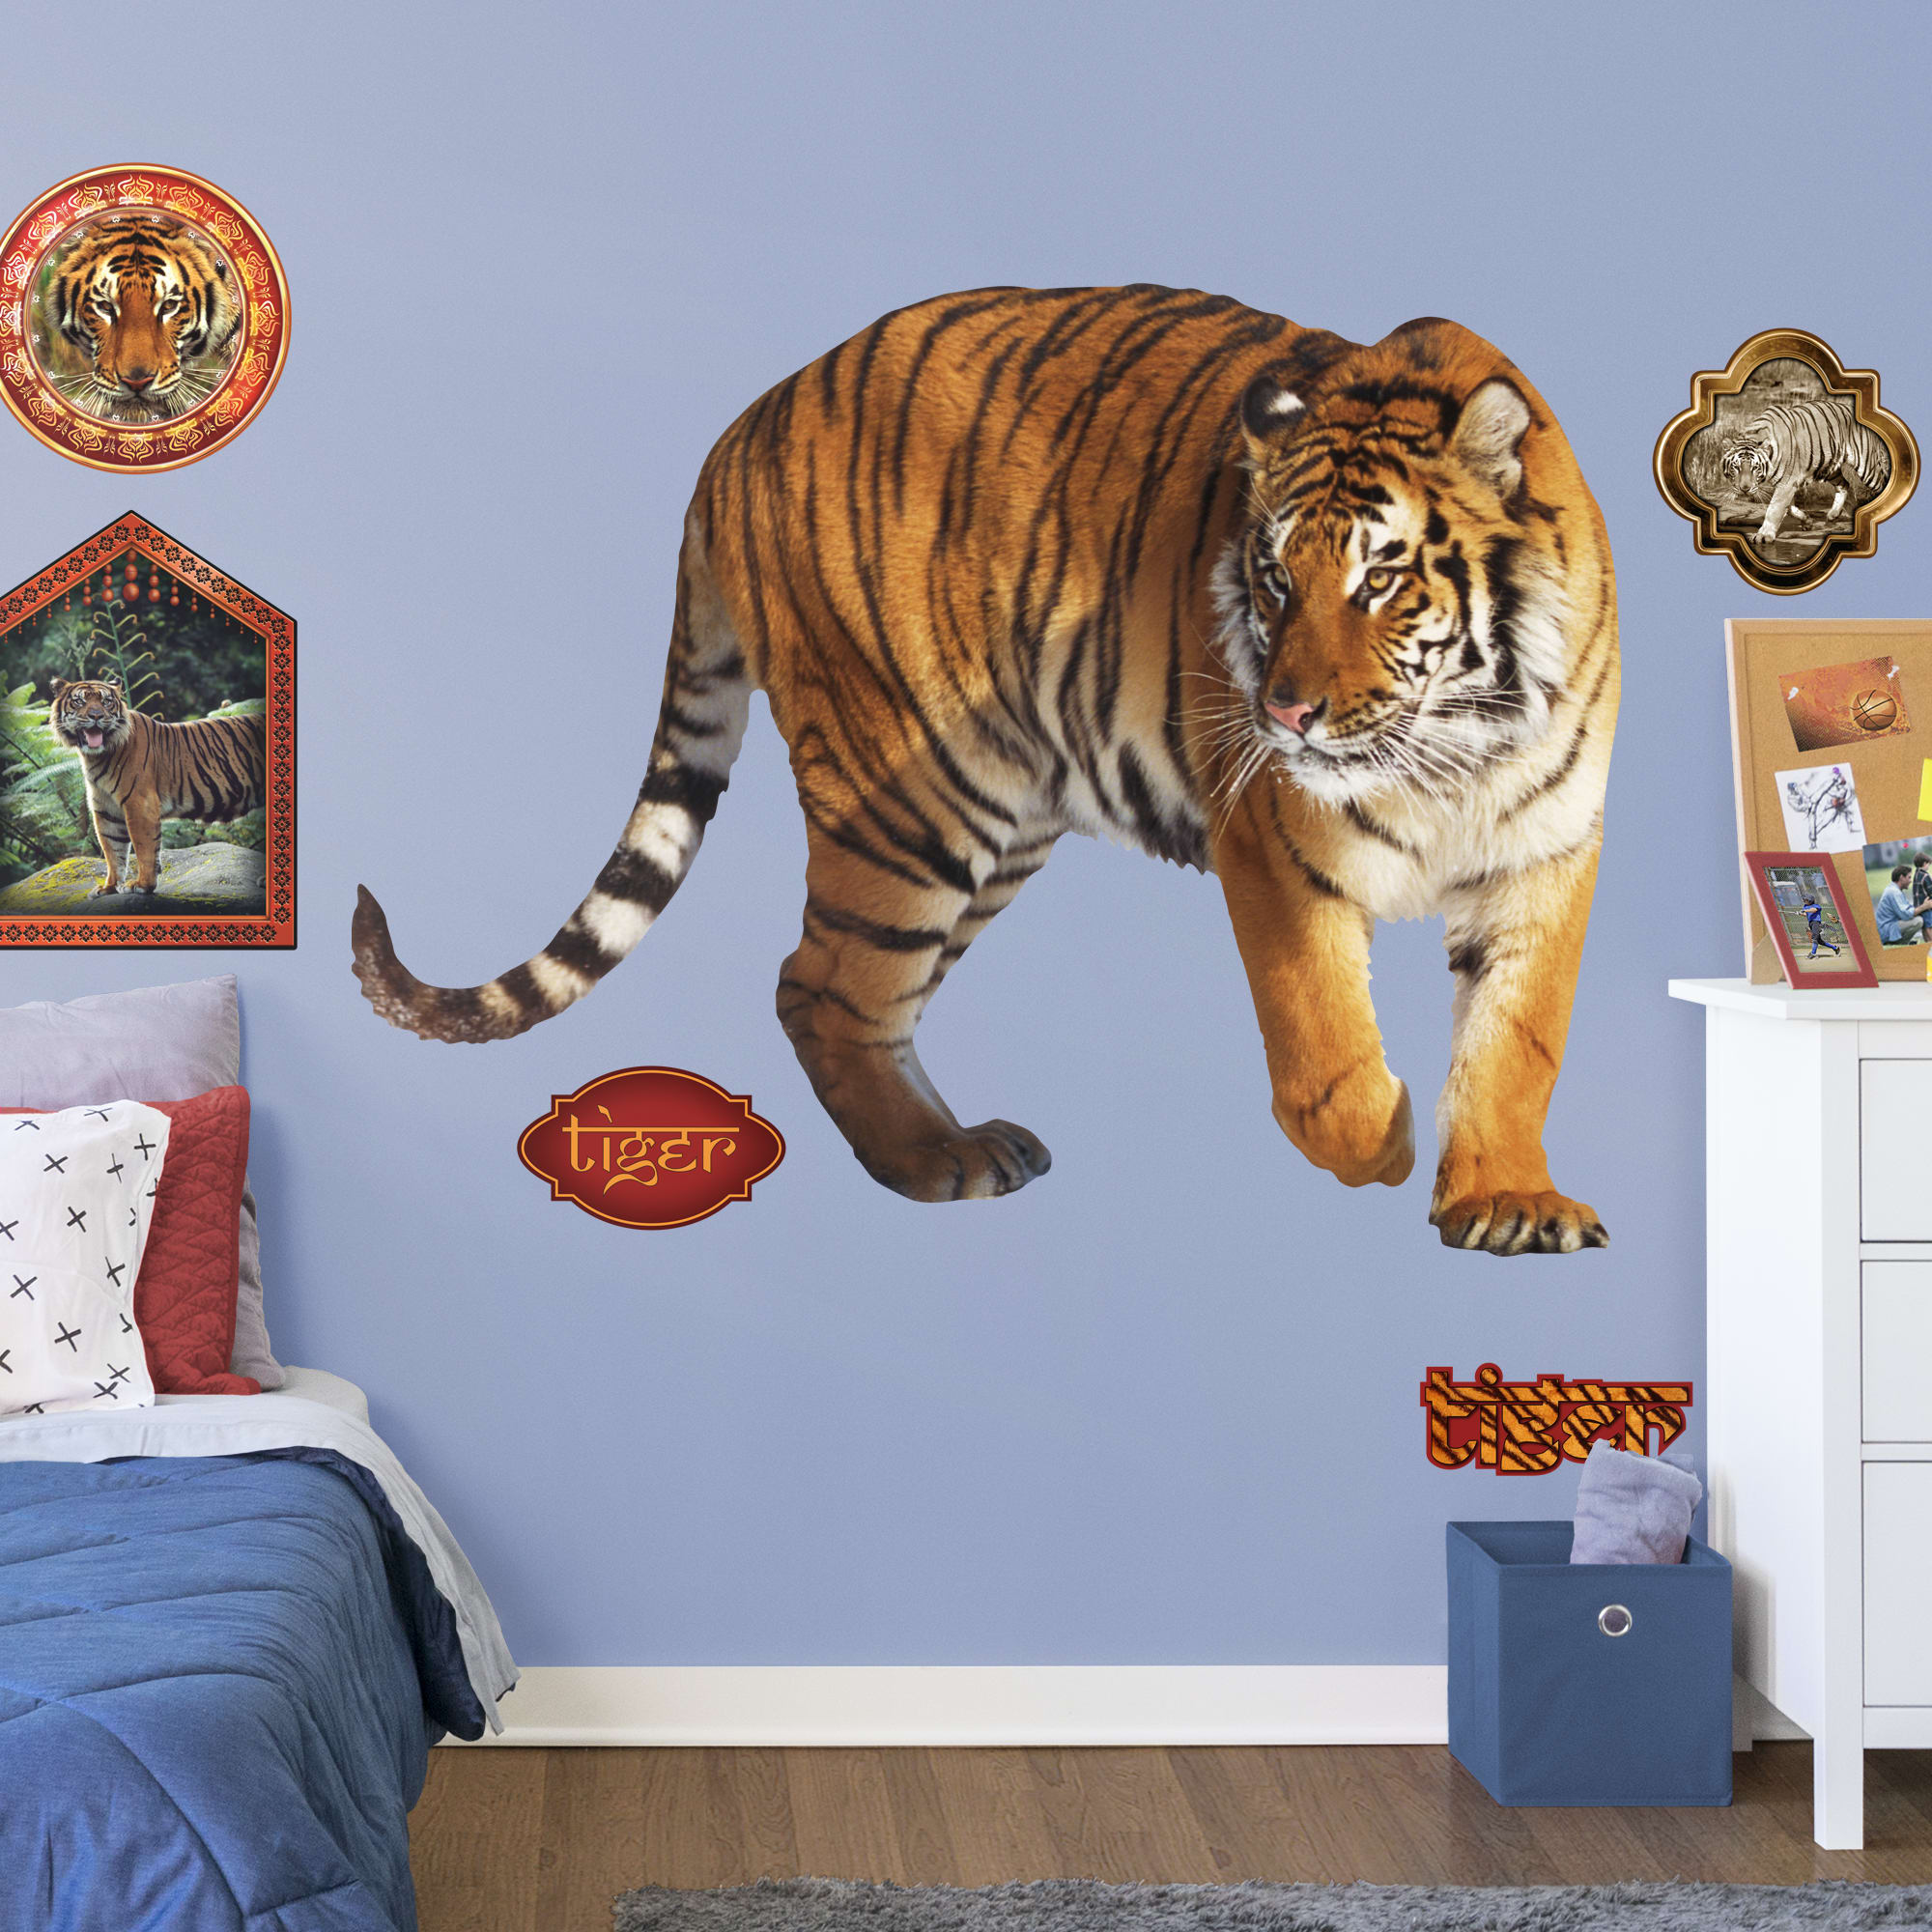 Tiger - Removable Vinyl Decal Life-Size Animal + 7 Licensed Decals (69"W x 53"H) by Fathead